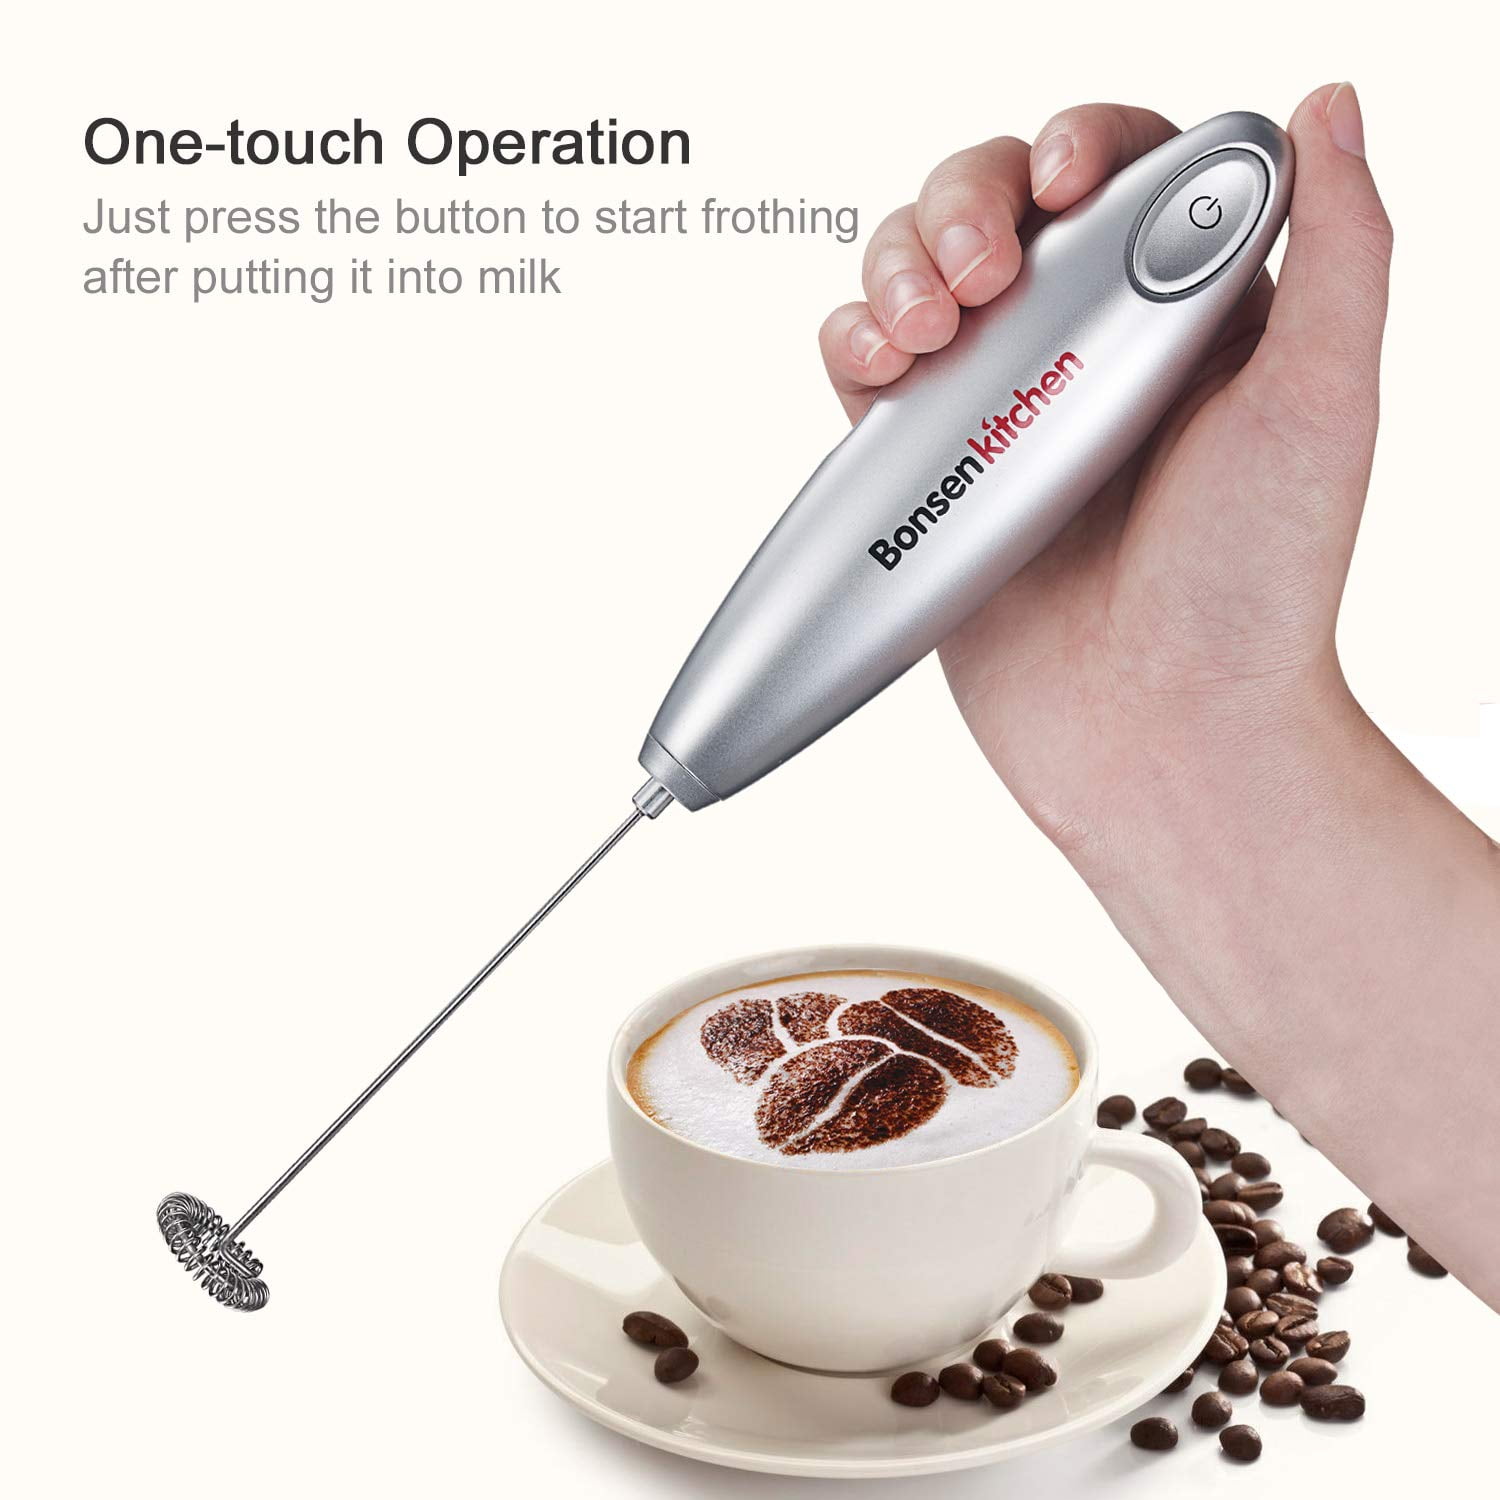  Bonsenkitchen Electric Milk Frother Handheld, Portable Whisk  Milk Foam Maker with Stainless Steel Stand, Drink Mixer for Coffee, Matcha,  Electric Stirrer Coffee Mixer, Battery Operated(Not Included): Home &  Kitchen